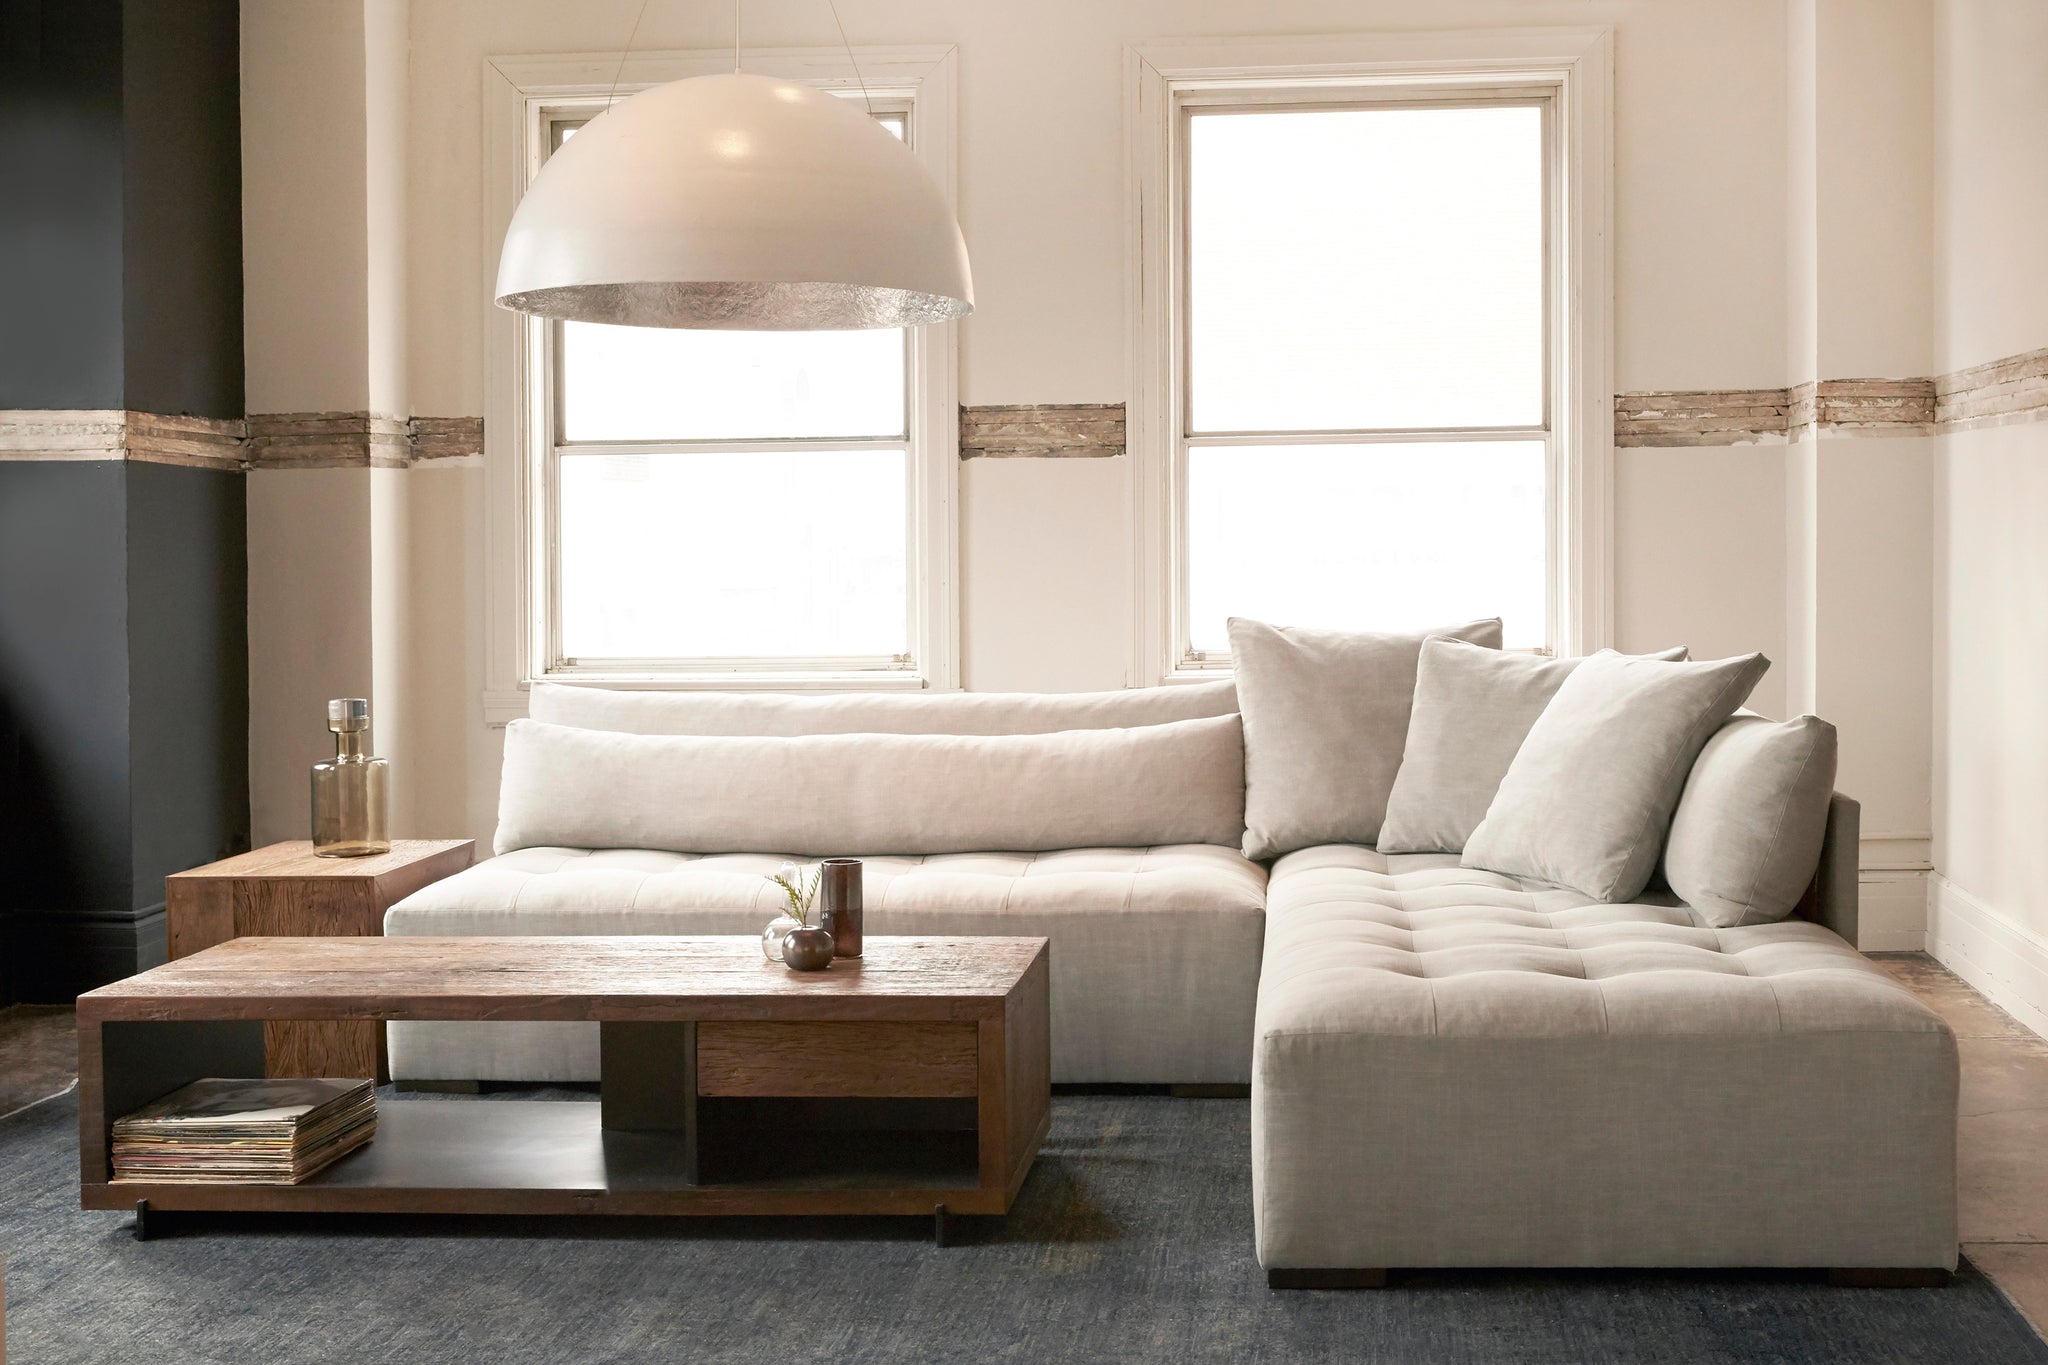  Tufted sectional upholstered in a neutral fabric with a wood coffee table placed in front of it and a white circular pendant hanging above it. Setting is placed in a white room with two large windows and sectional is placed on top of a grey rug.  